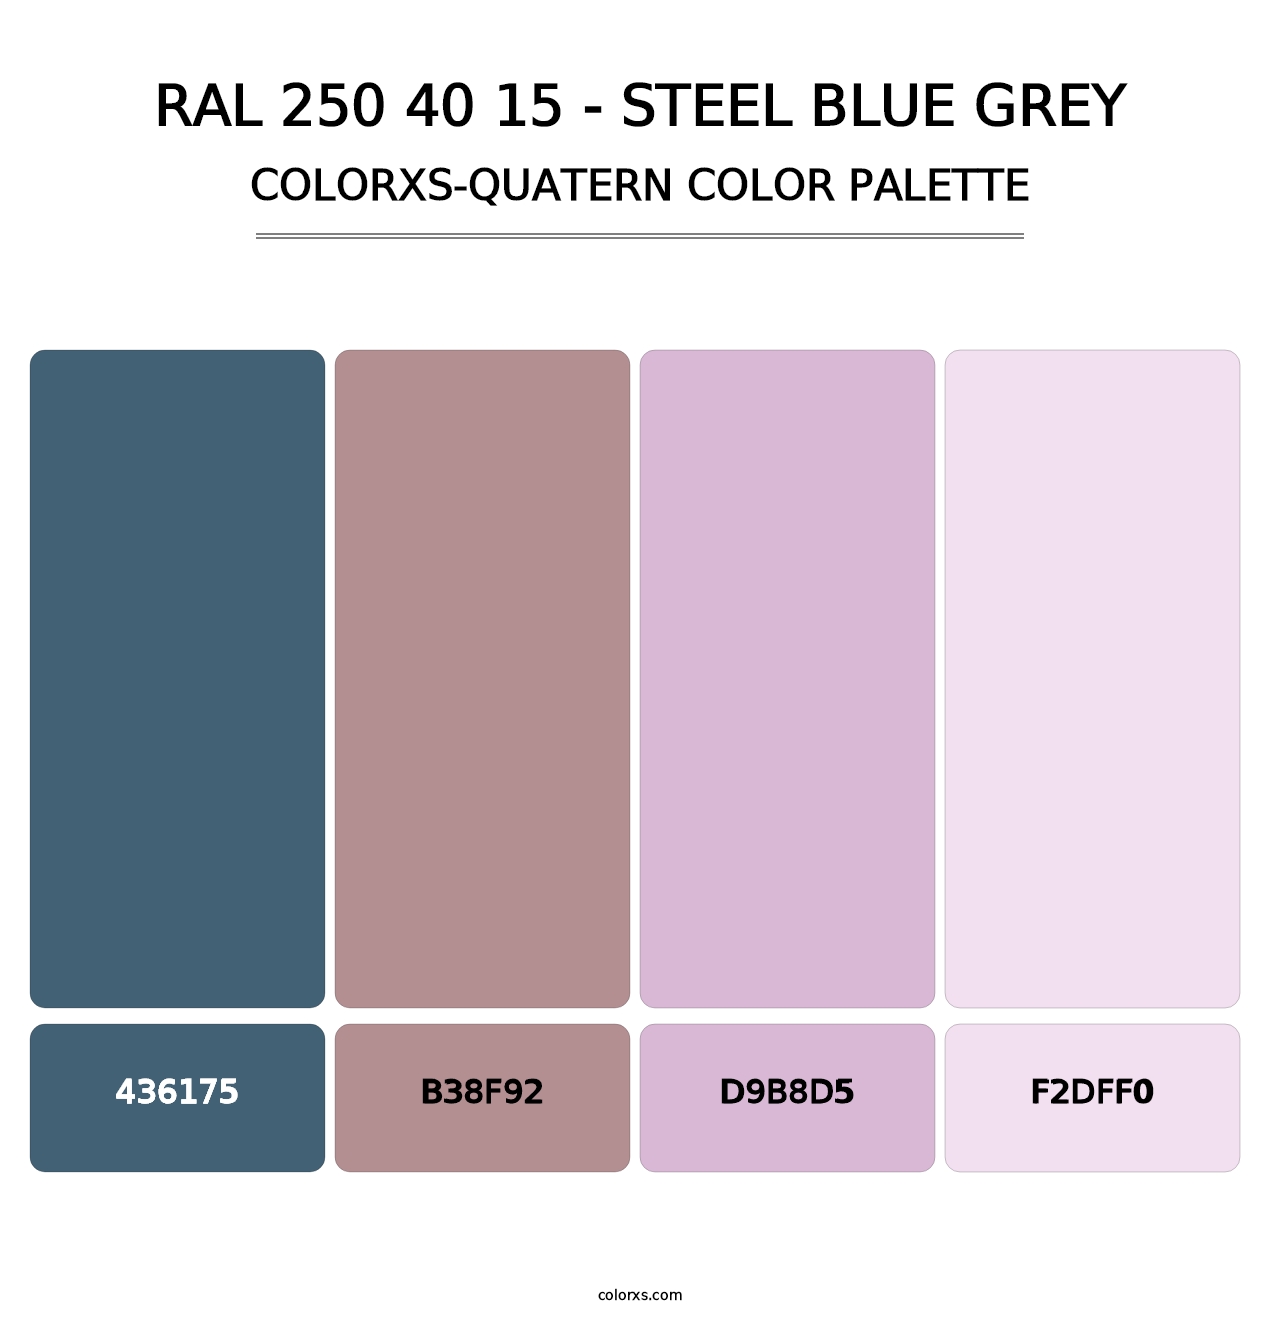 RAL 250 40 15 - Steel Blue Grey - Colorxs Quatern Palette